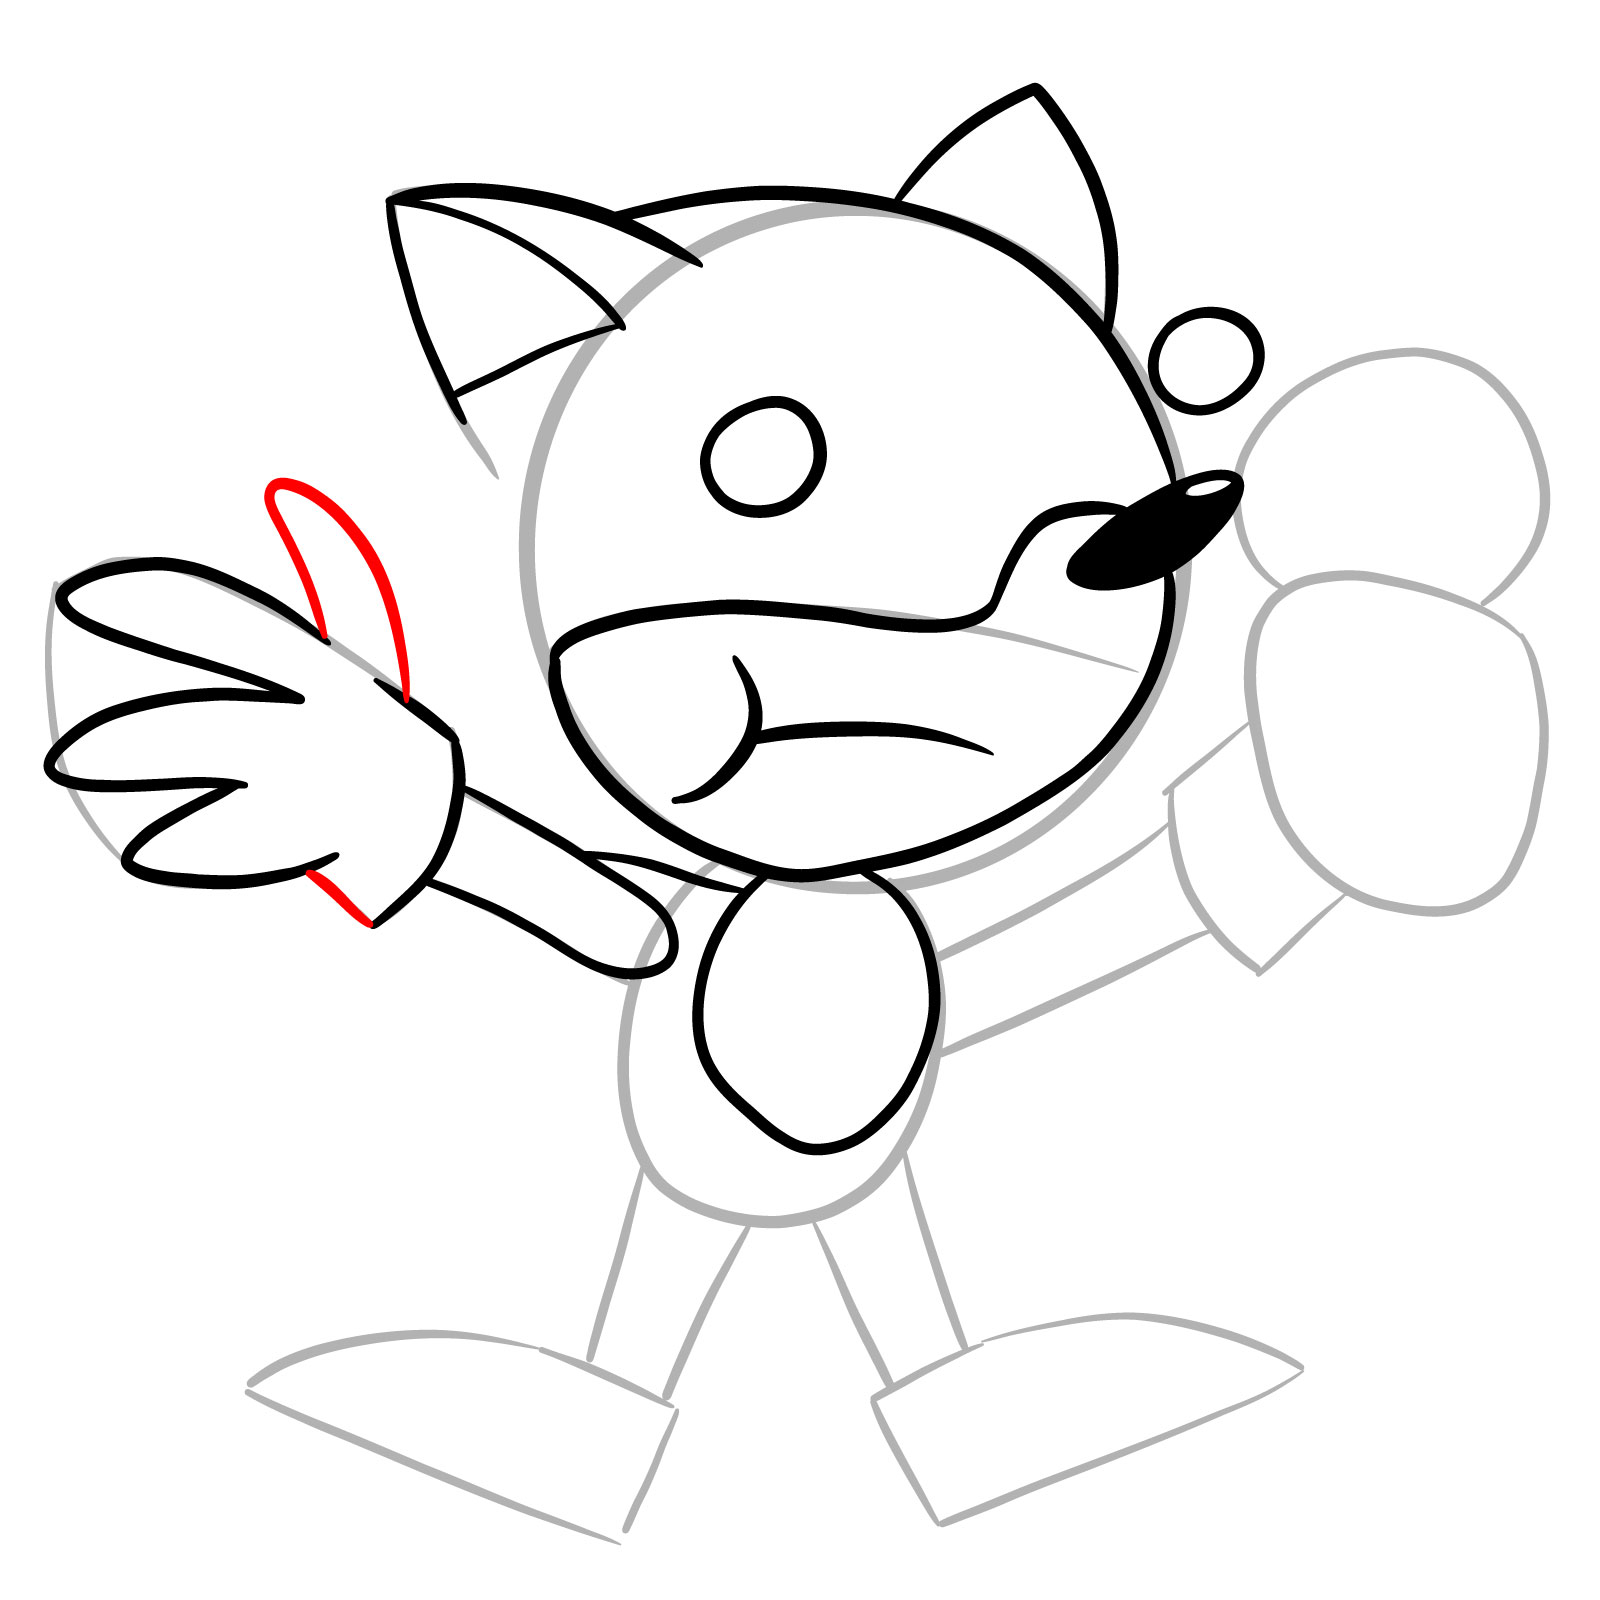 How to draw Sonic.Exe - FNF - Sketchok easy drawing guides